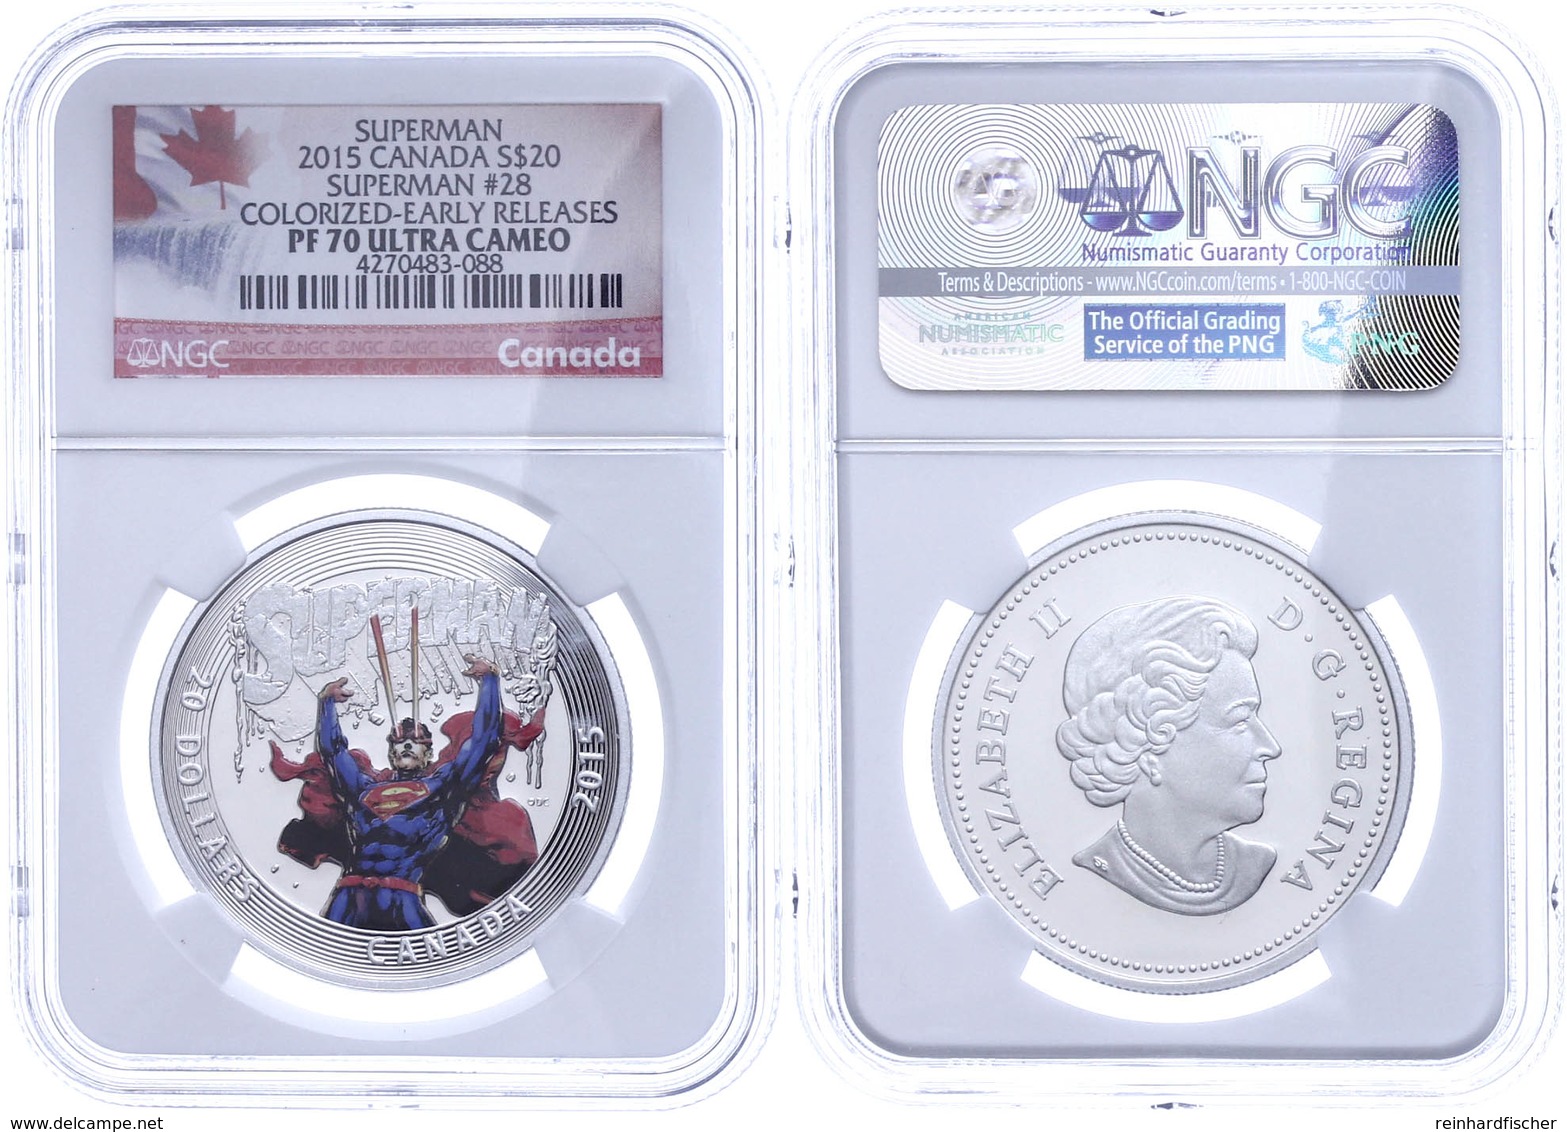 20 Dollars, 2015, Superman #28, In Slab Der NGC Mit Der Bewertung PF 70 Ultra Cameo, Colorized Early Releases, Flag Labe - Canada